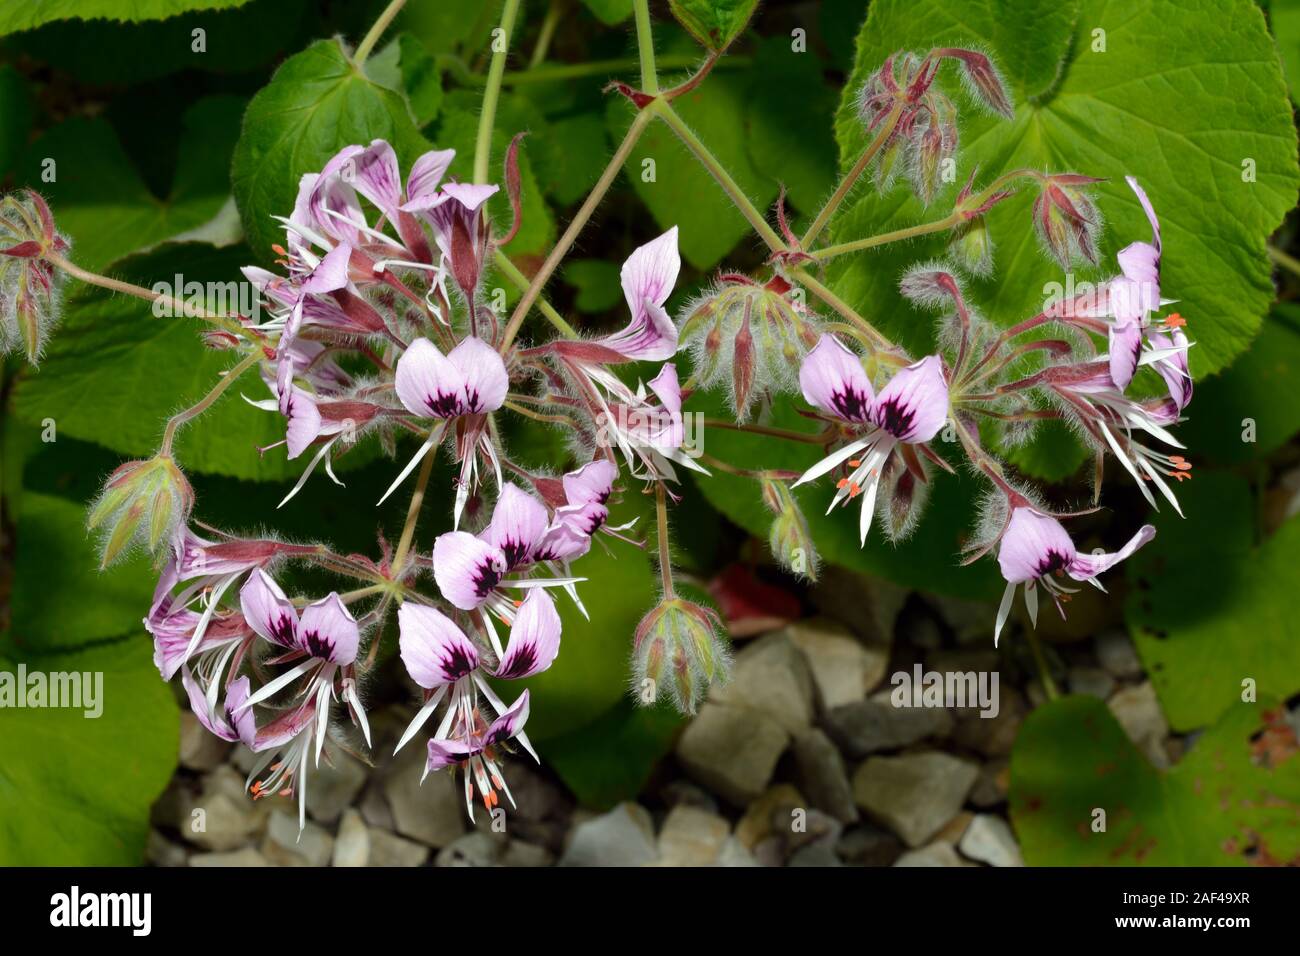 Pelargonium alchemilloides is widespread in Africa and can tolerate both wet and arid conditions. Stock Photo